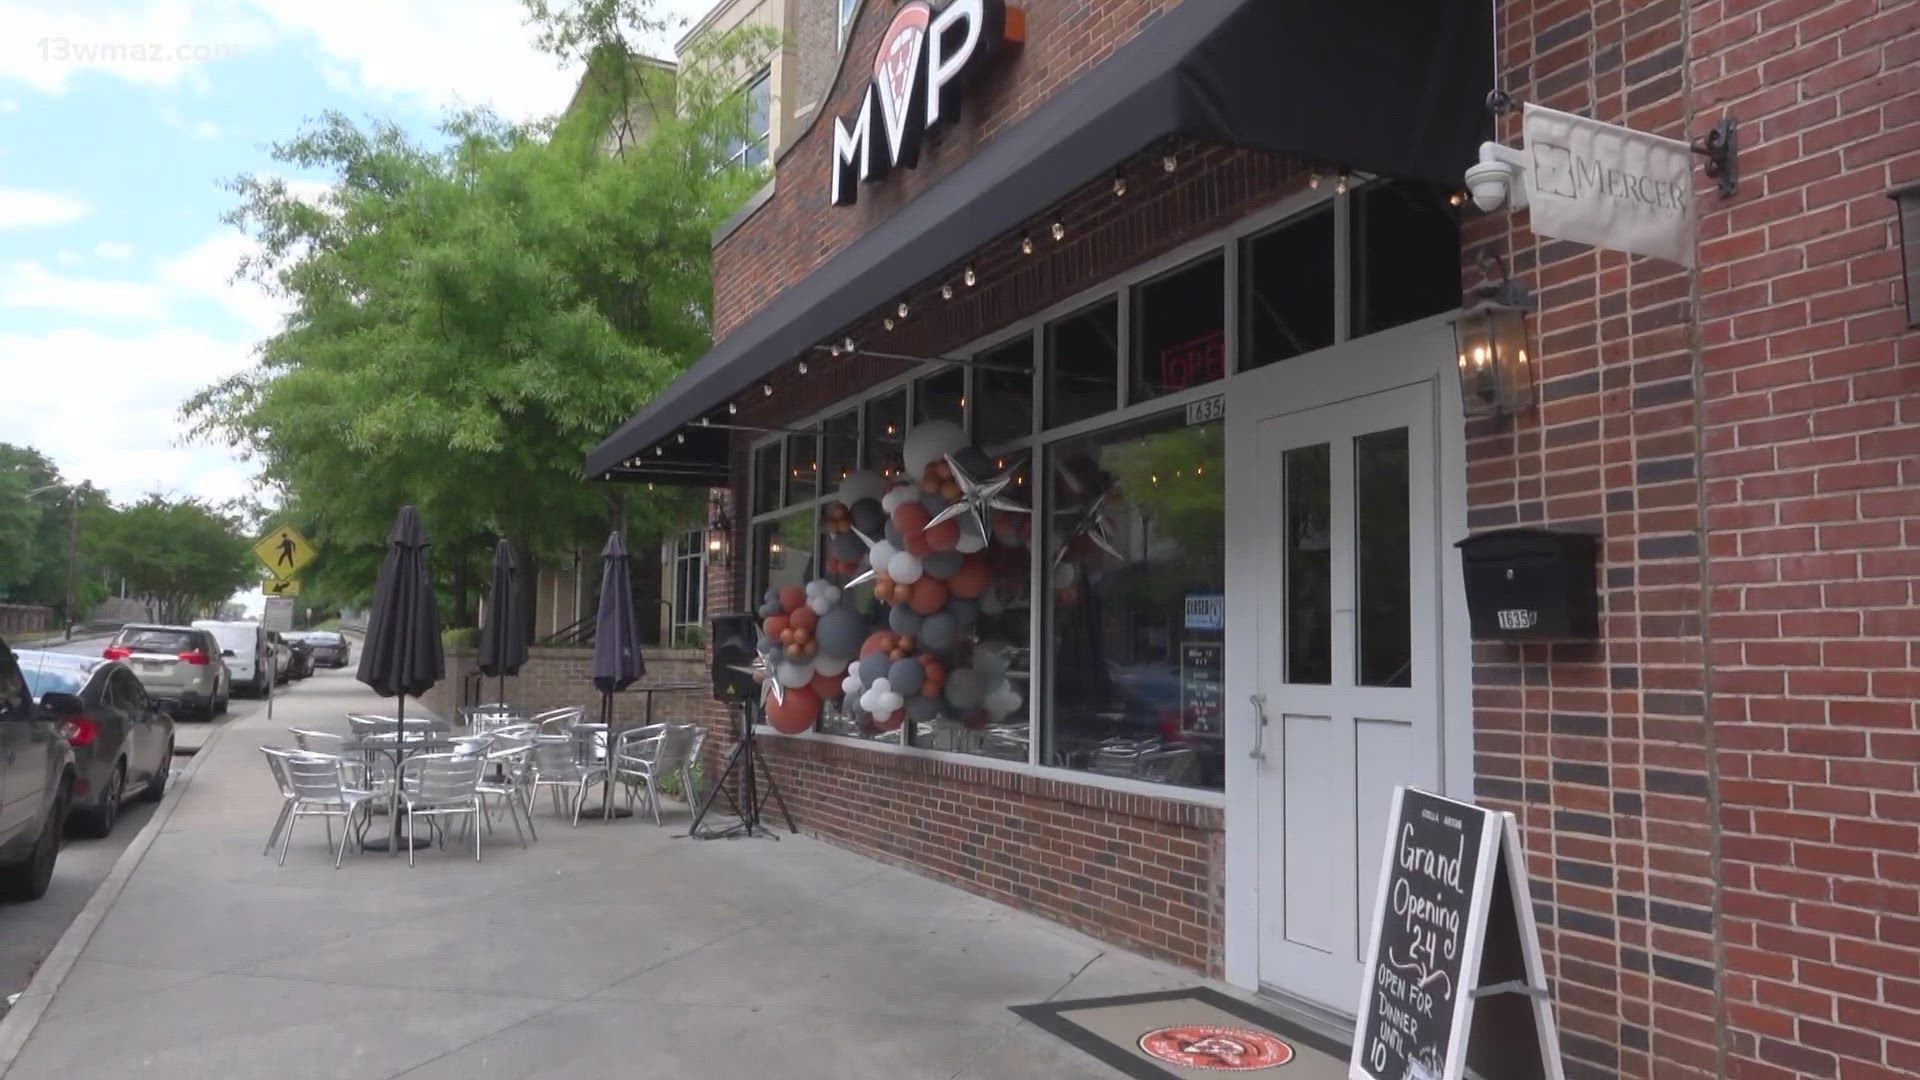 Mercer Village now has a new place to stop in for a bite to eat, in the spot where Jags Pizzeria used to sit.